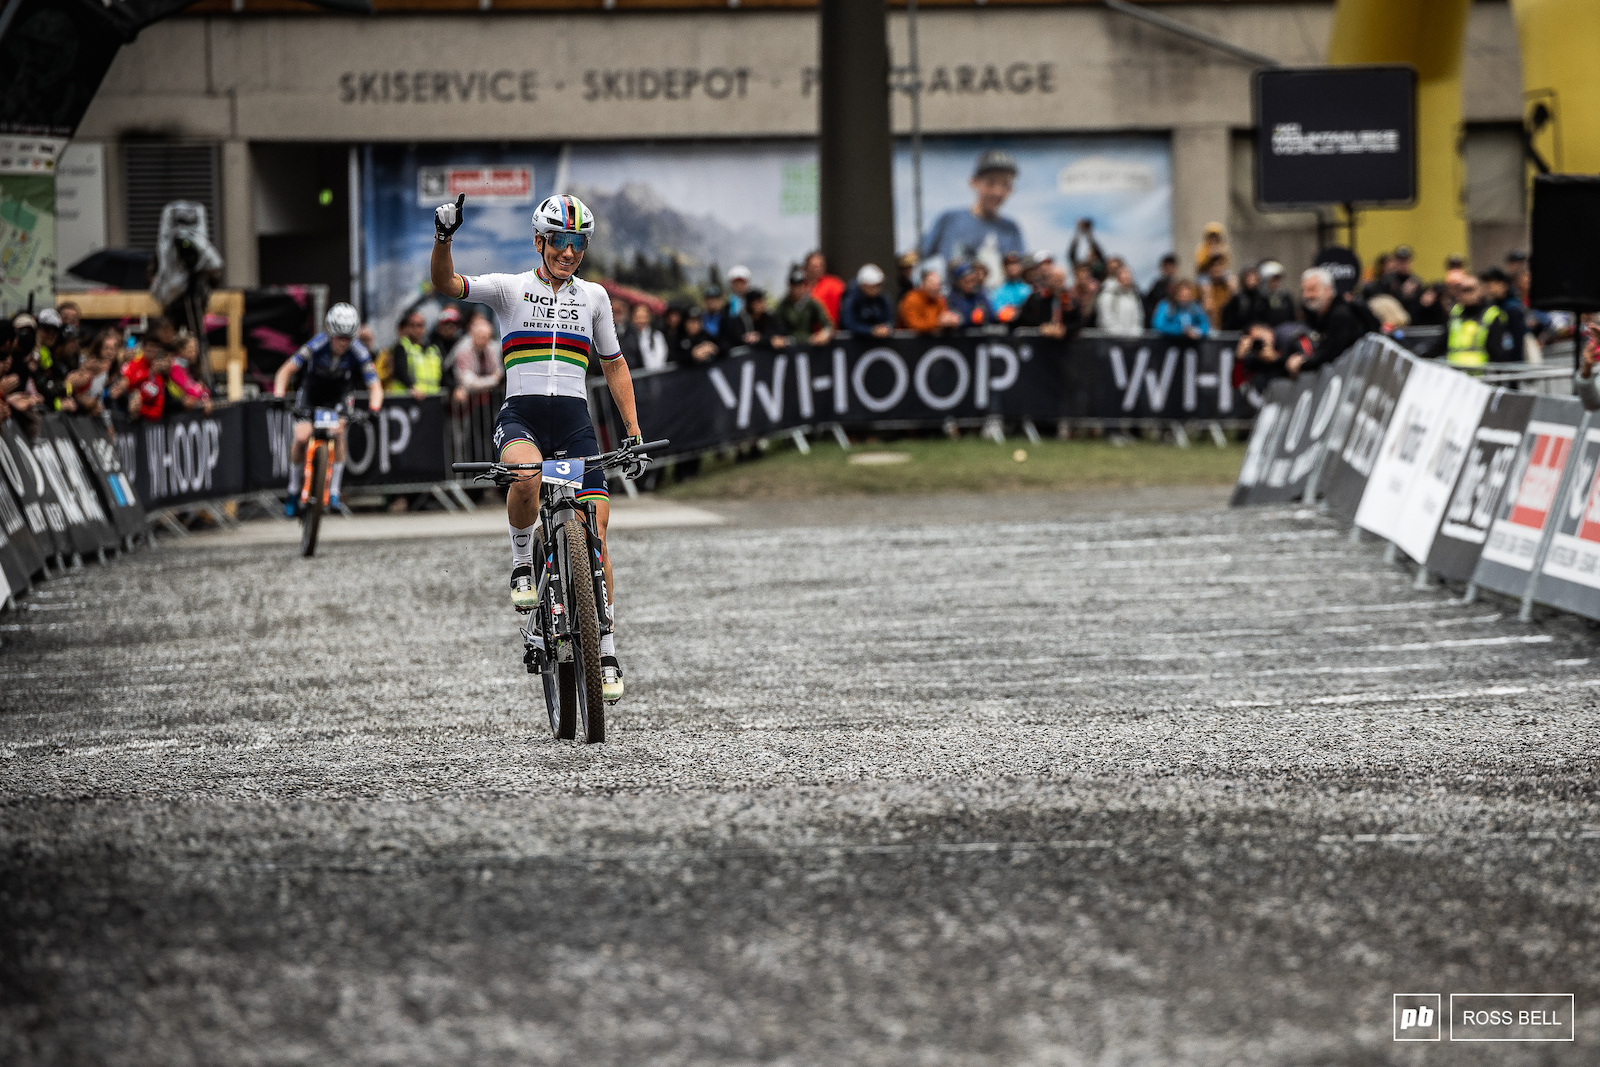 Pauline Ferrand Prevot s smart riding was rewarded with the short track win.